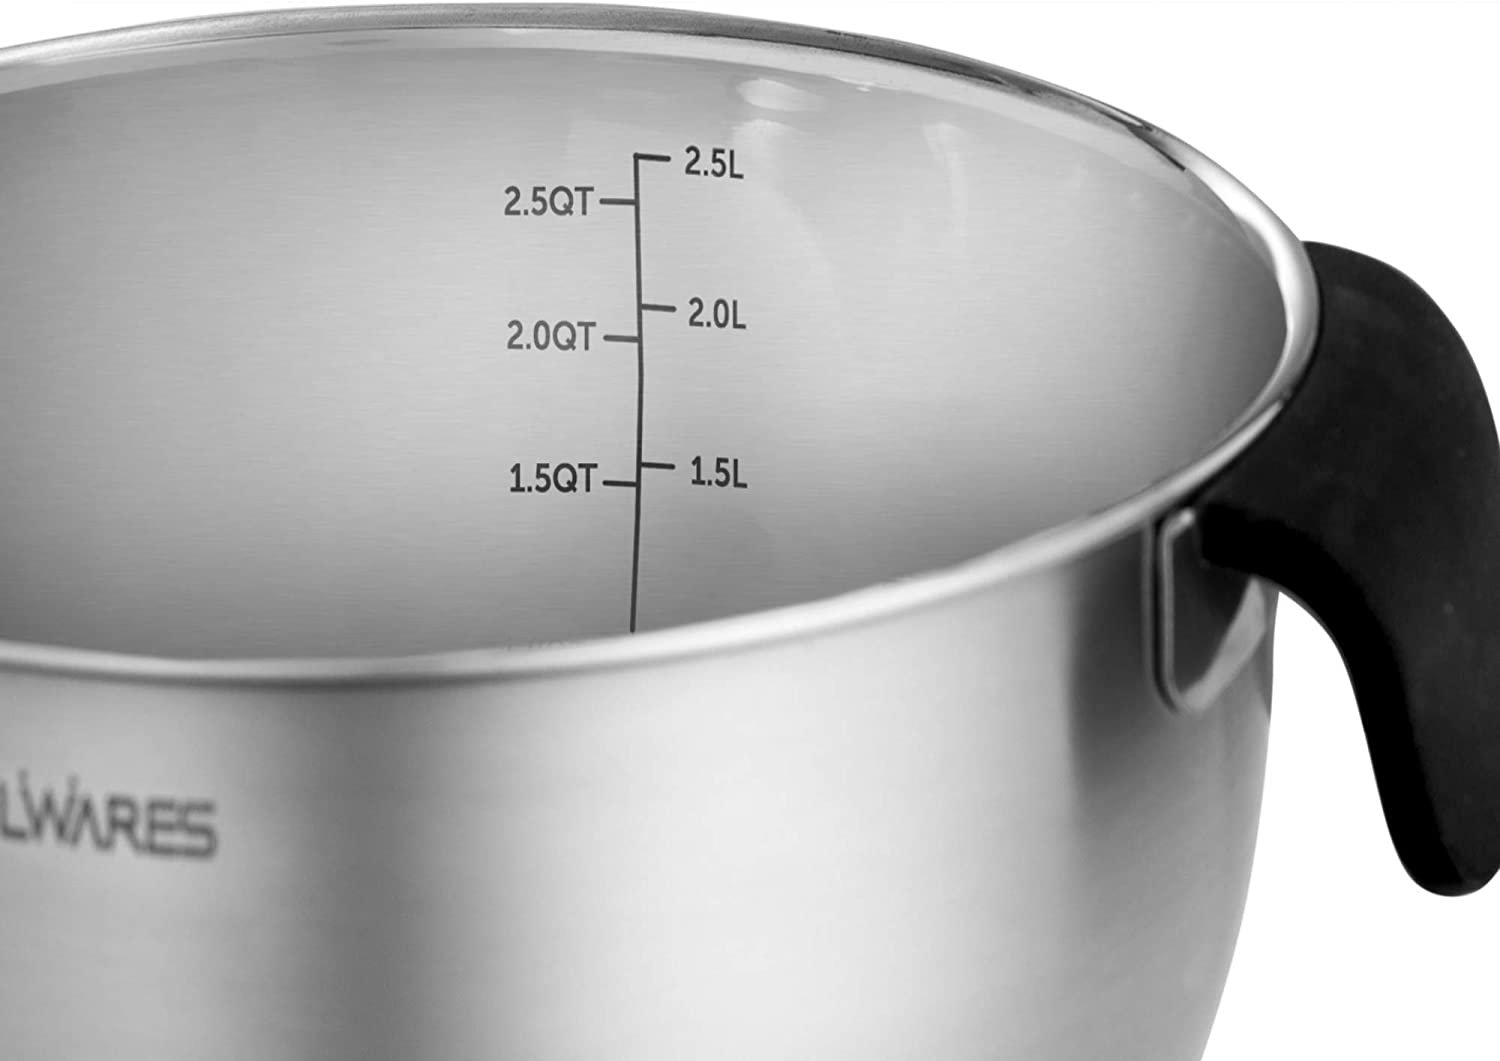 OVENTE Mixing Bowl Stainless Steel with Lids, Nesting Bowls with Measuring  Marks, Safe Easy to Clean & Storage, Perfect for Cooking Baking Serving,  Silver BM46333S, 1.5, 3.5, and 5 Quarts, Set of 3 